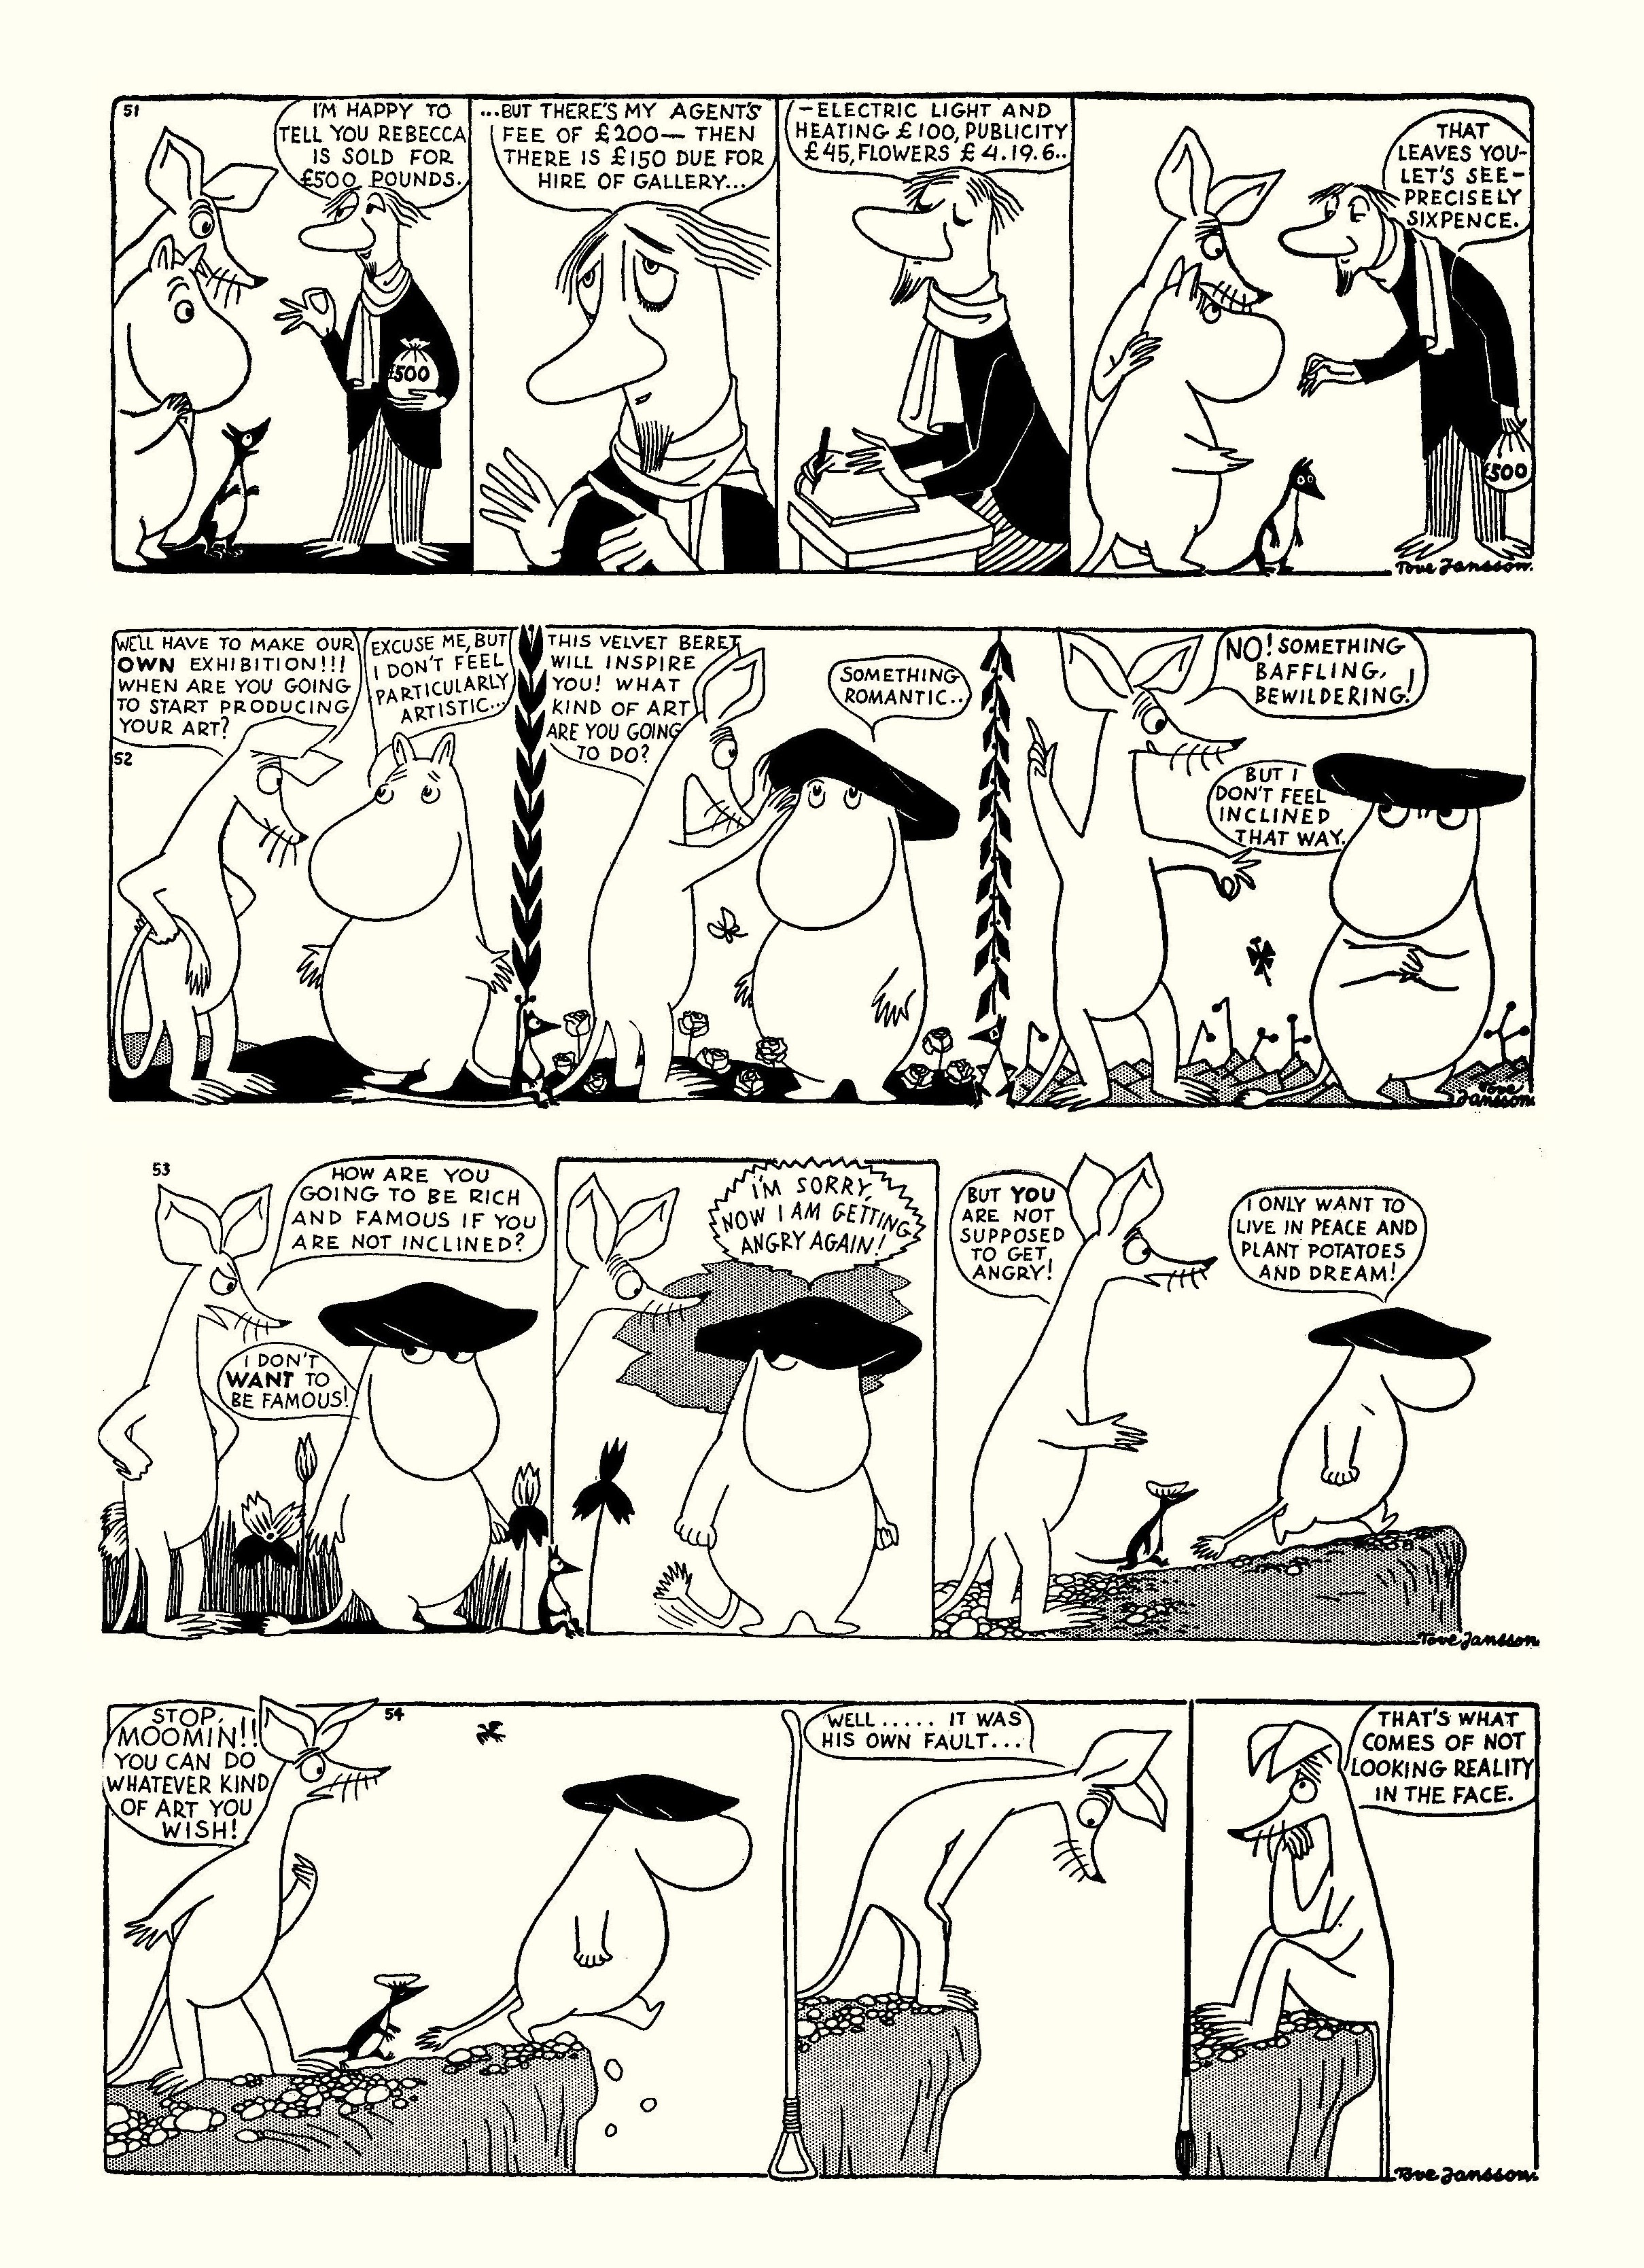 Read online Moomin: The Complete Tove Jansson Comic Strip comic -  Issue # TPB 1 - 19